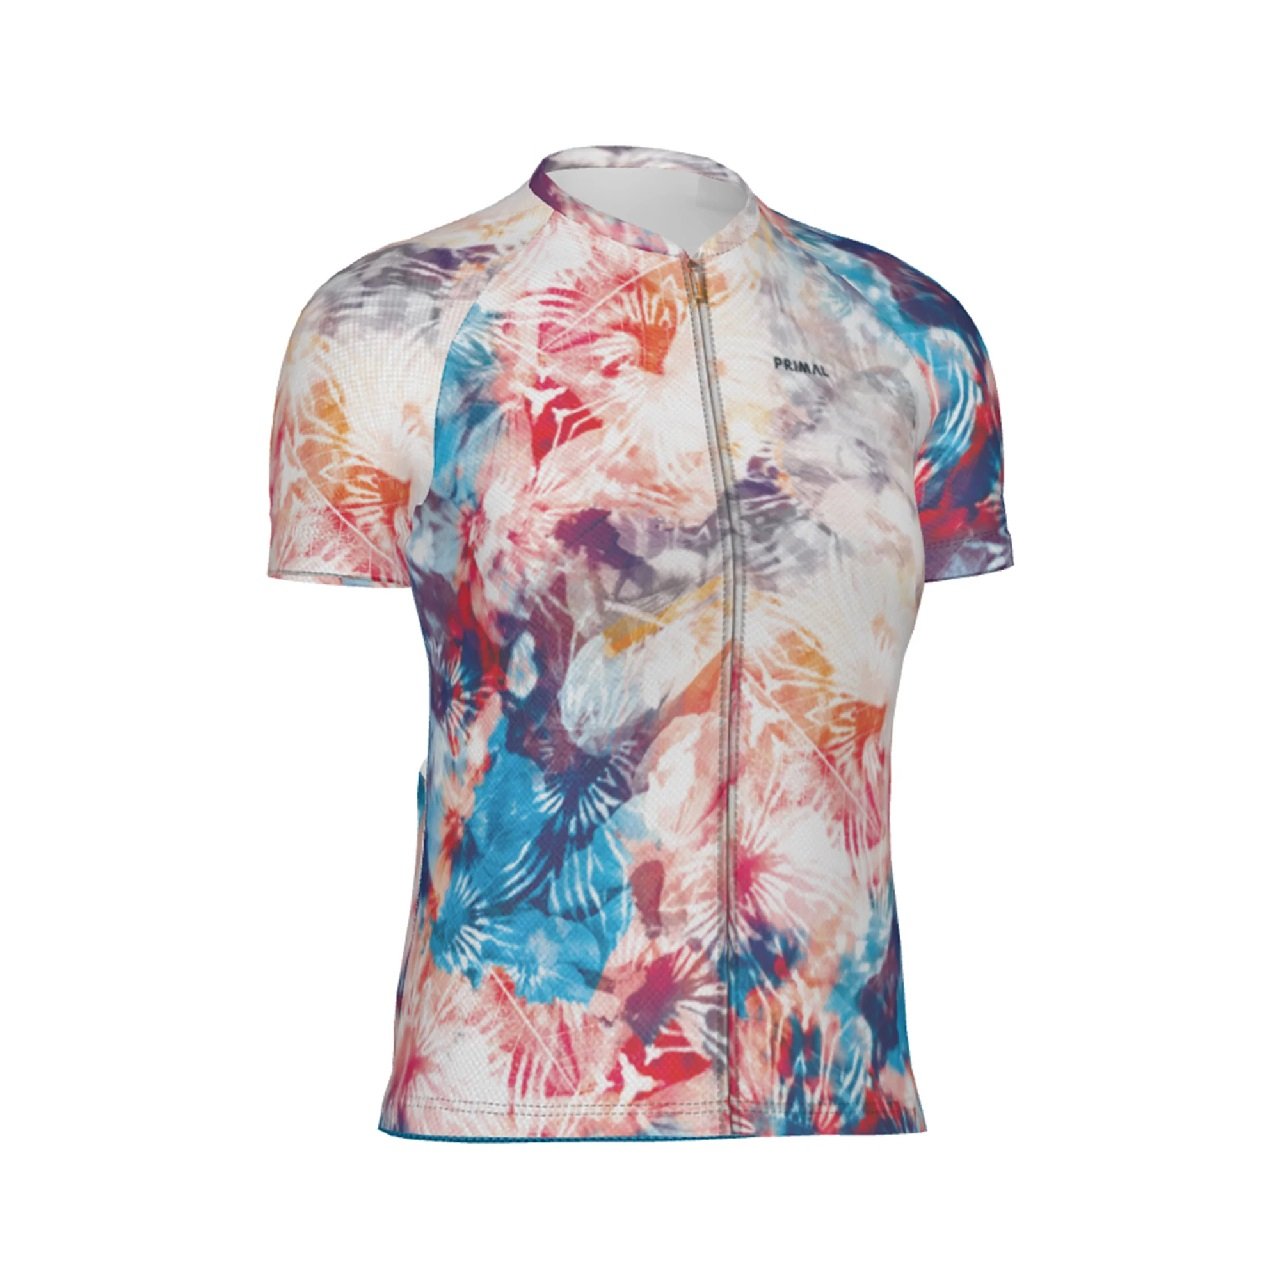 Cycling Jersey Aquarelle Women's Multicolored by Primal AQRLJ80W